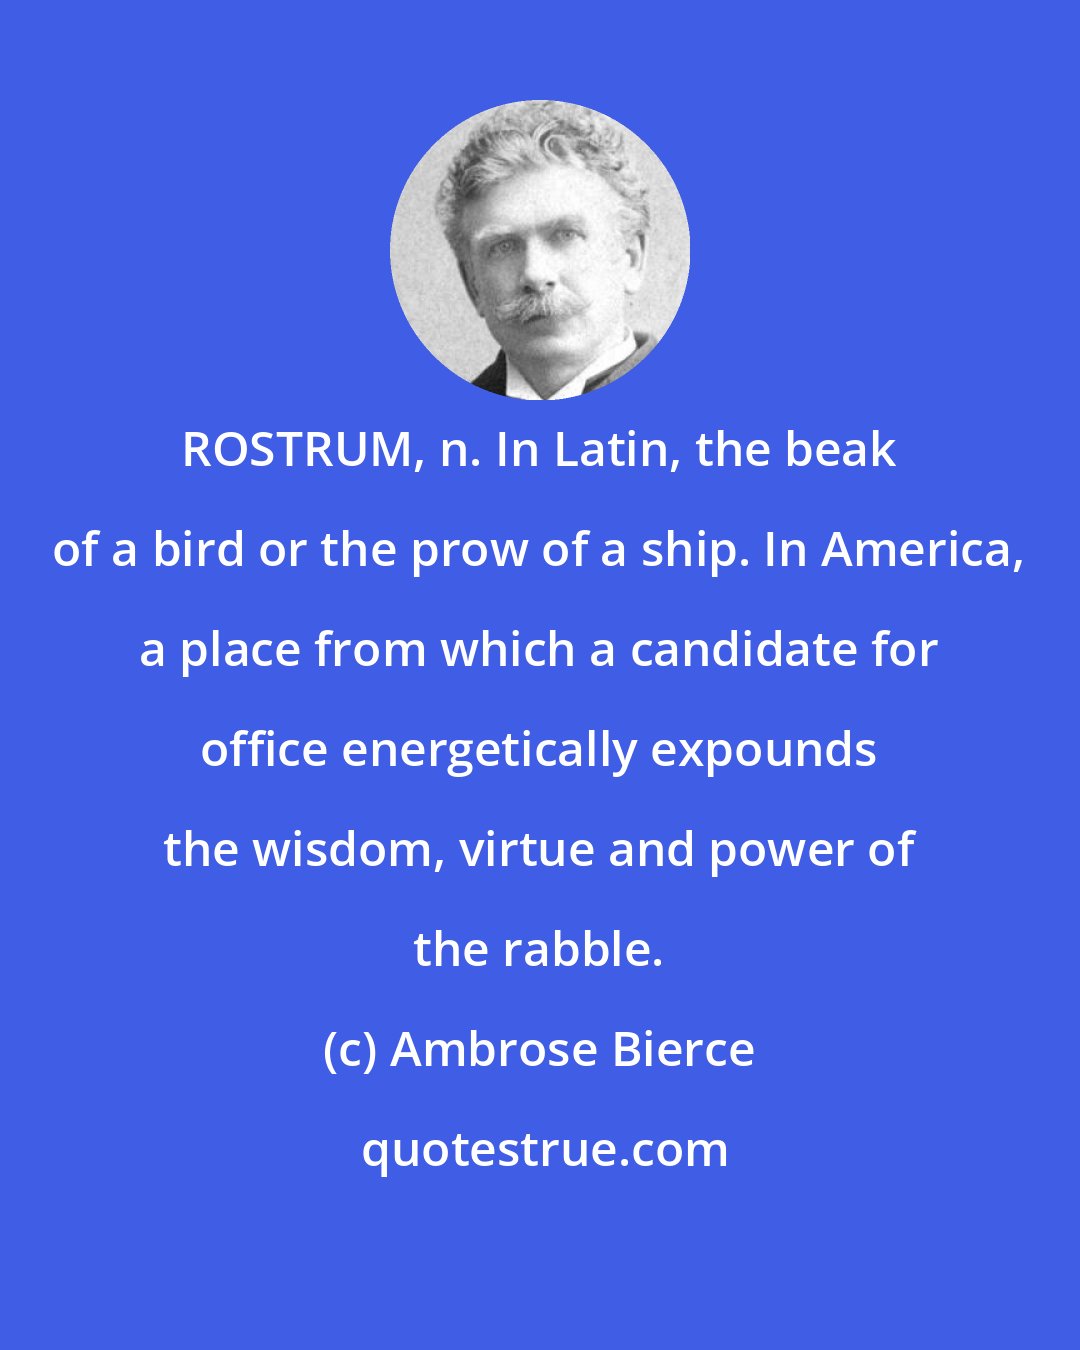 Ambrose Bierce: ROSTRUM, n. In Latin, the beak of a bird or the prow of a ship. In America, a place from which a candidate for office energetically expounds the wisdom, virtue and power of the rabble.